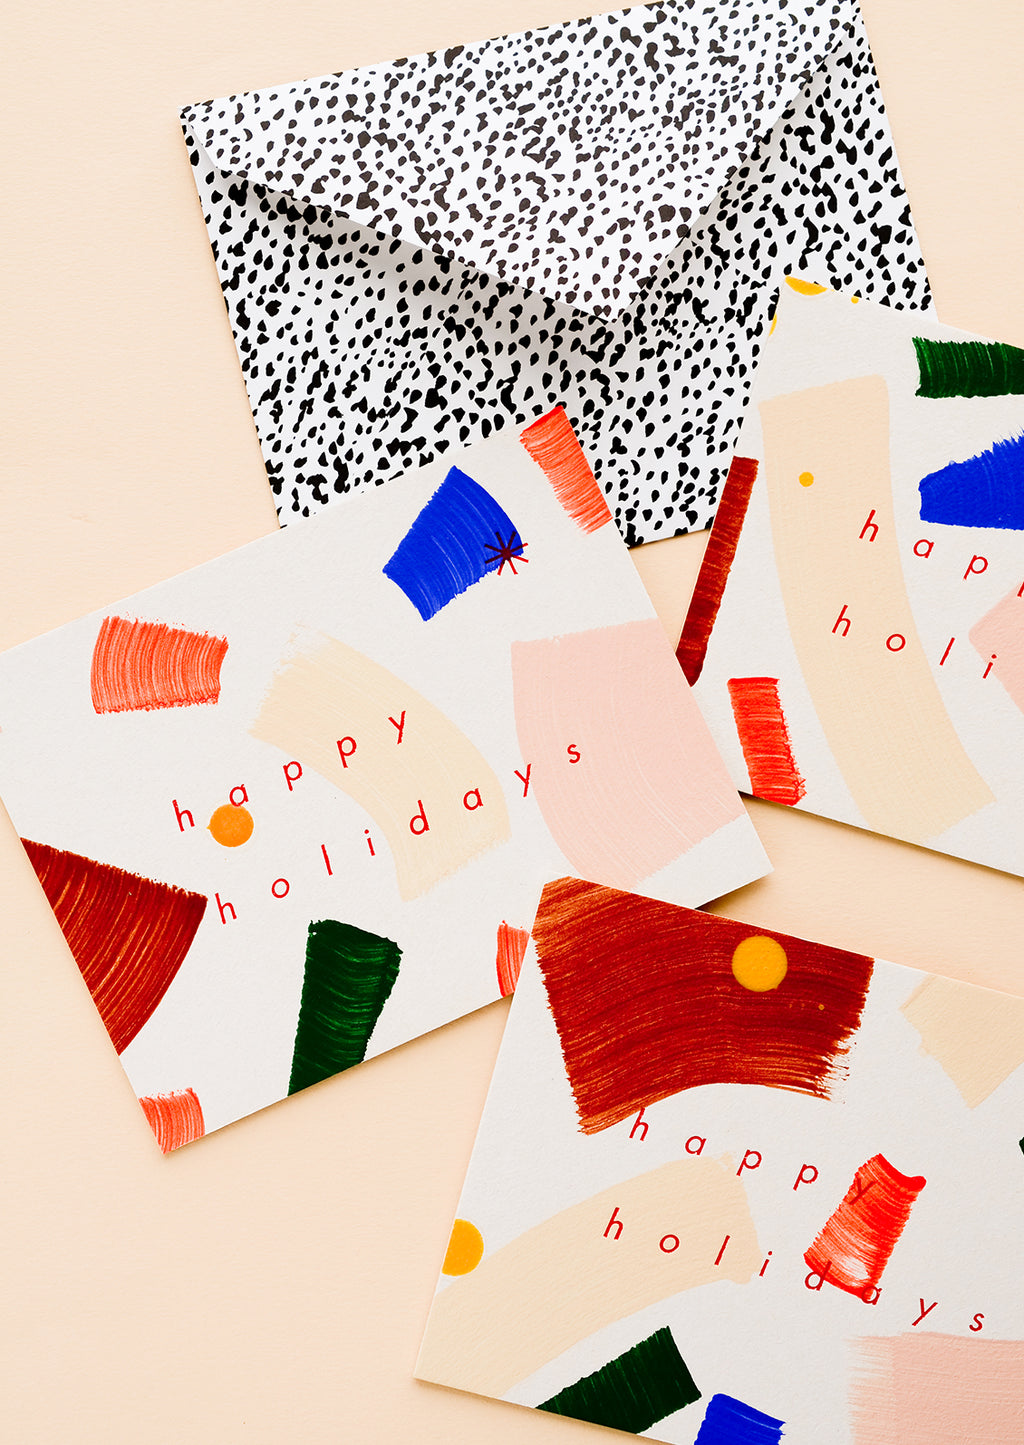 1: Three matching greeting cards with hand-painted brushstrokes and "happy holidays" in red lettering.